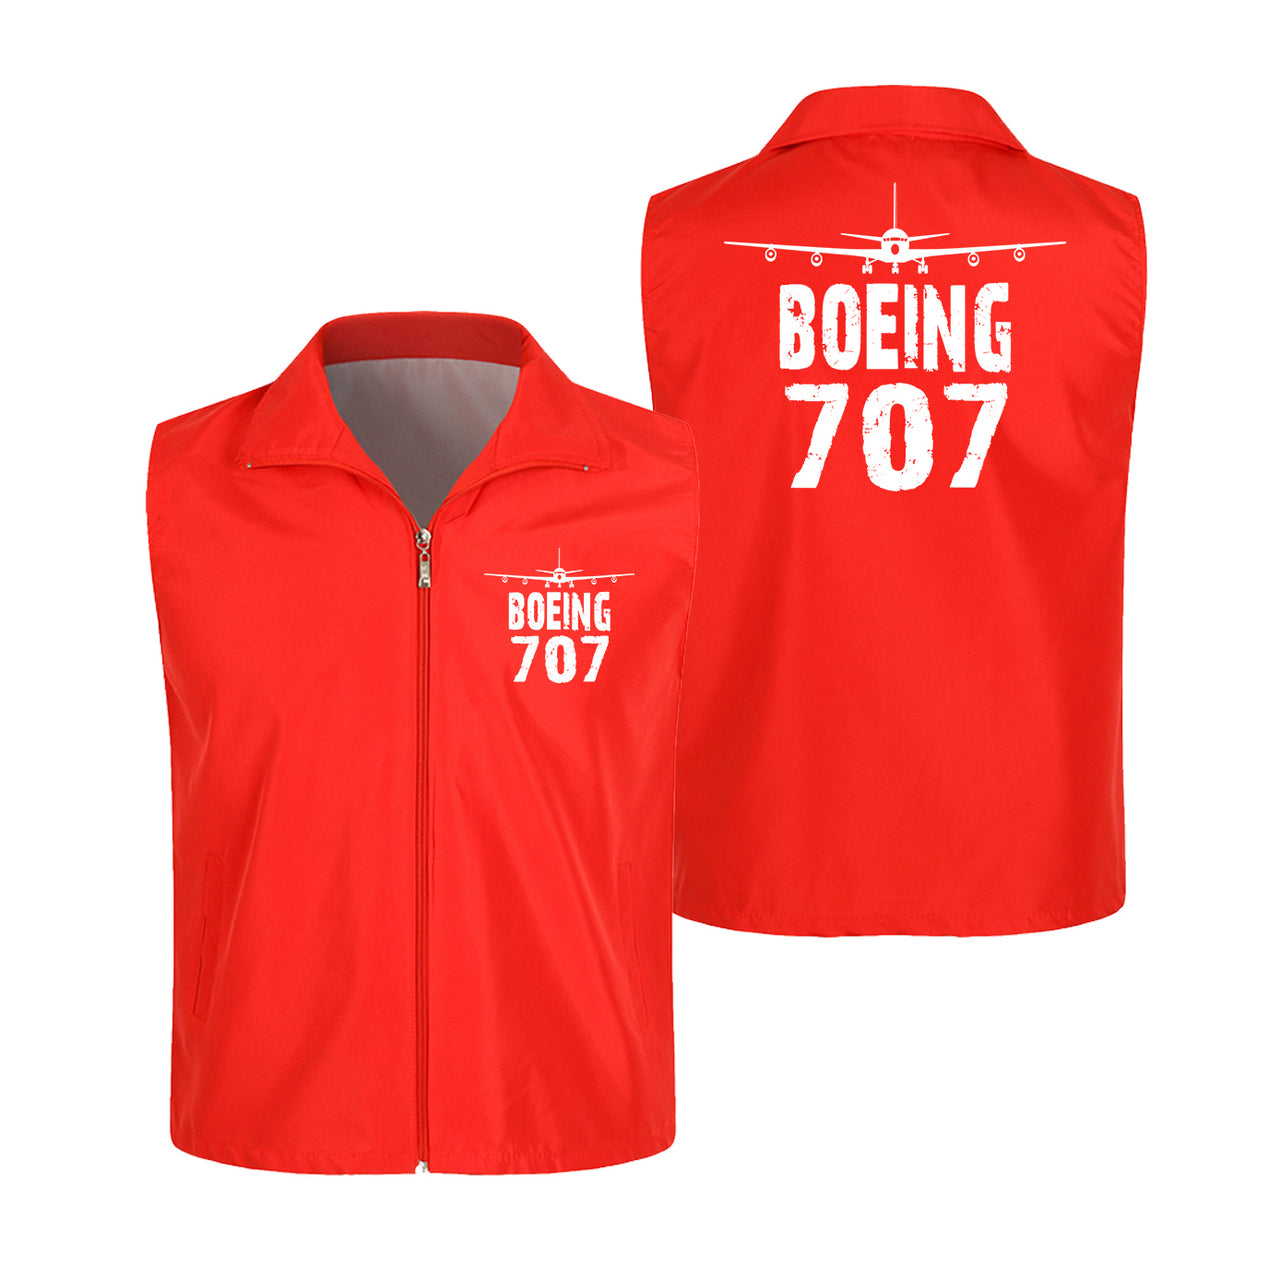 Boeing 707 & Plane Designed Thin Style Vests